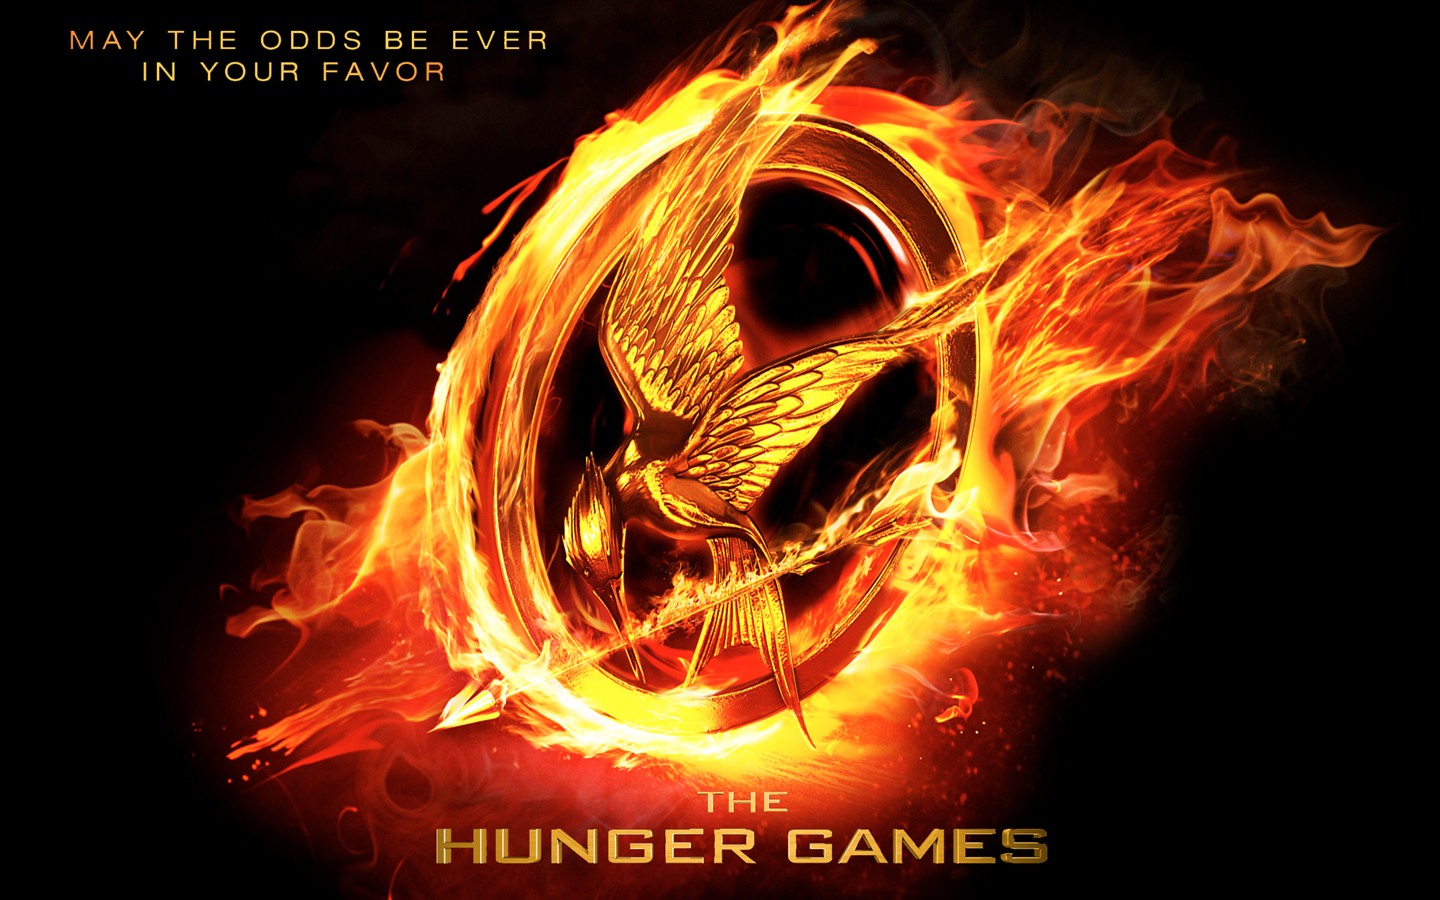 The Hunger Games HD wallpapers #13 - 1440x900